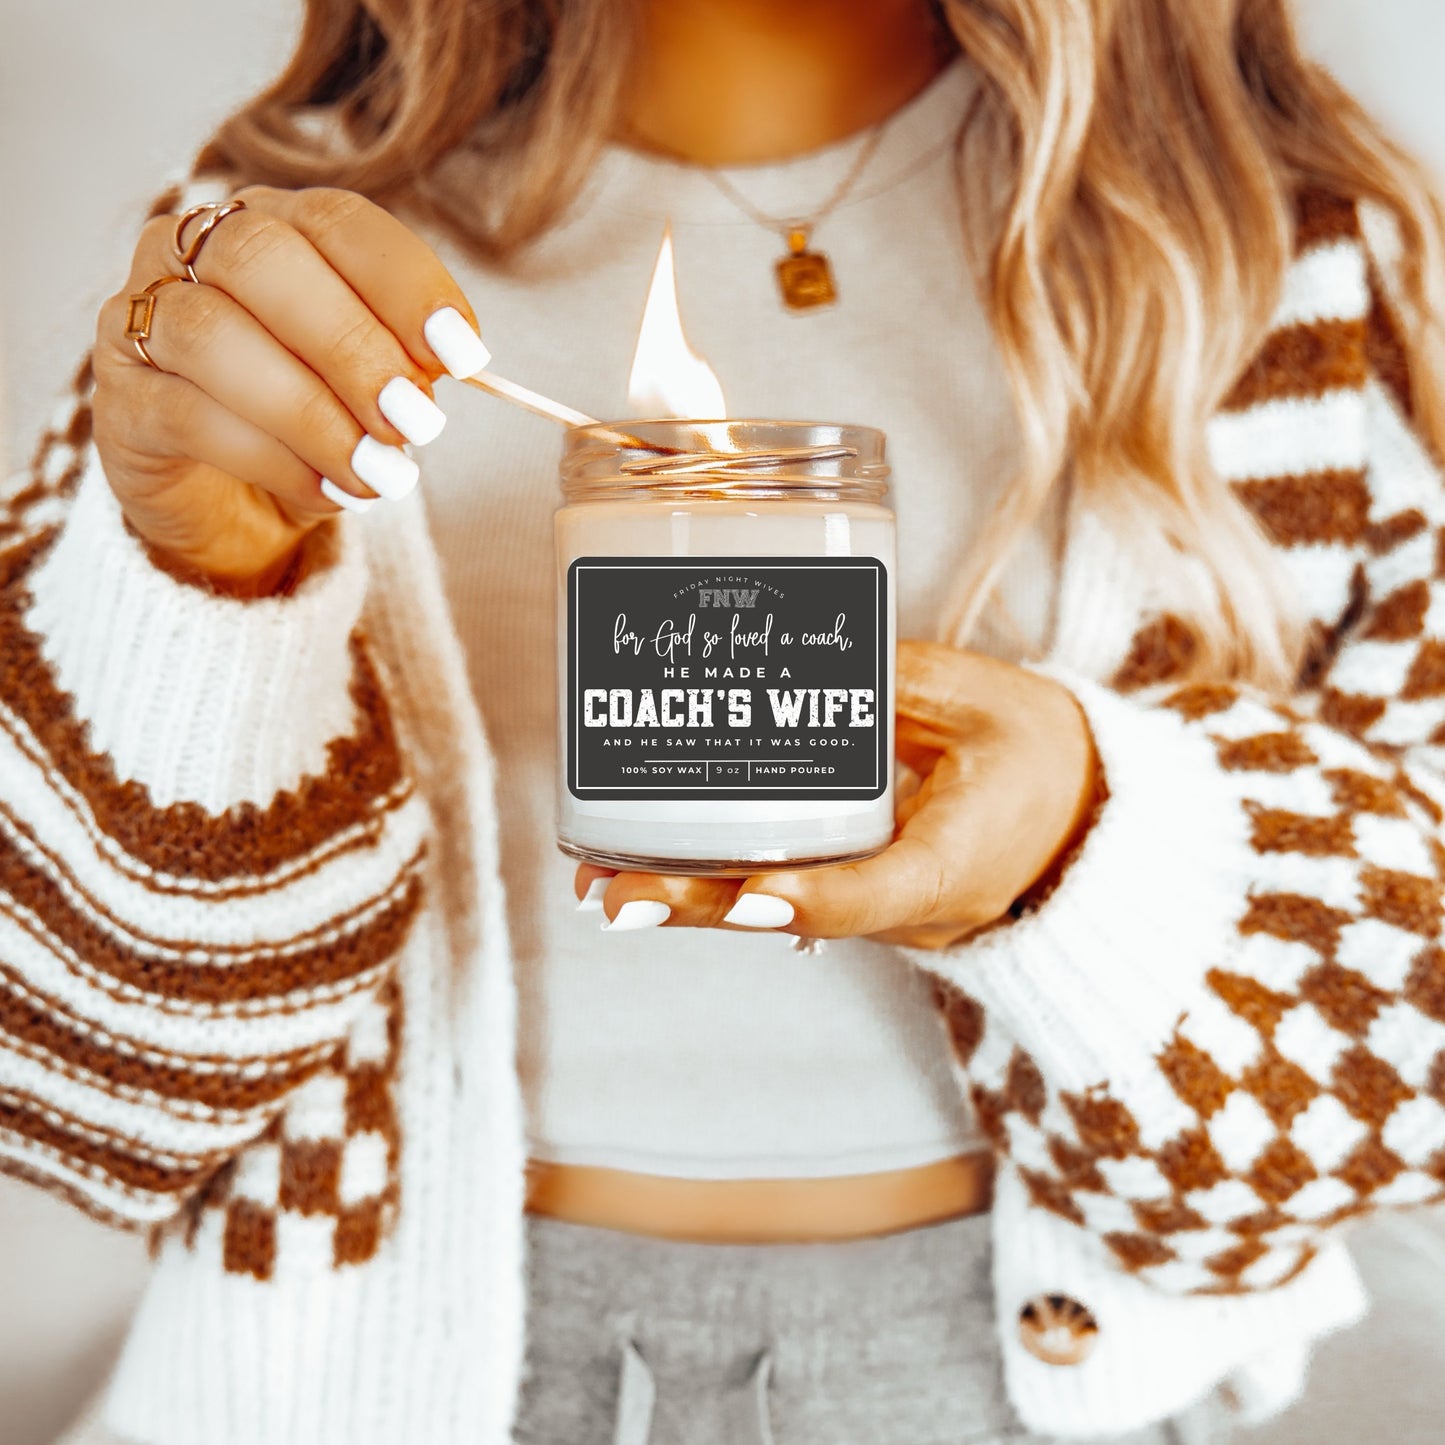 So God Made a Coach's Wife Candle